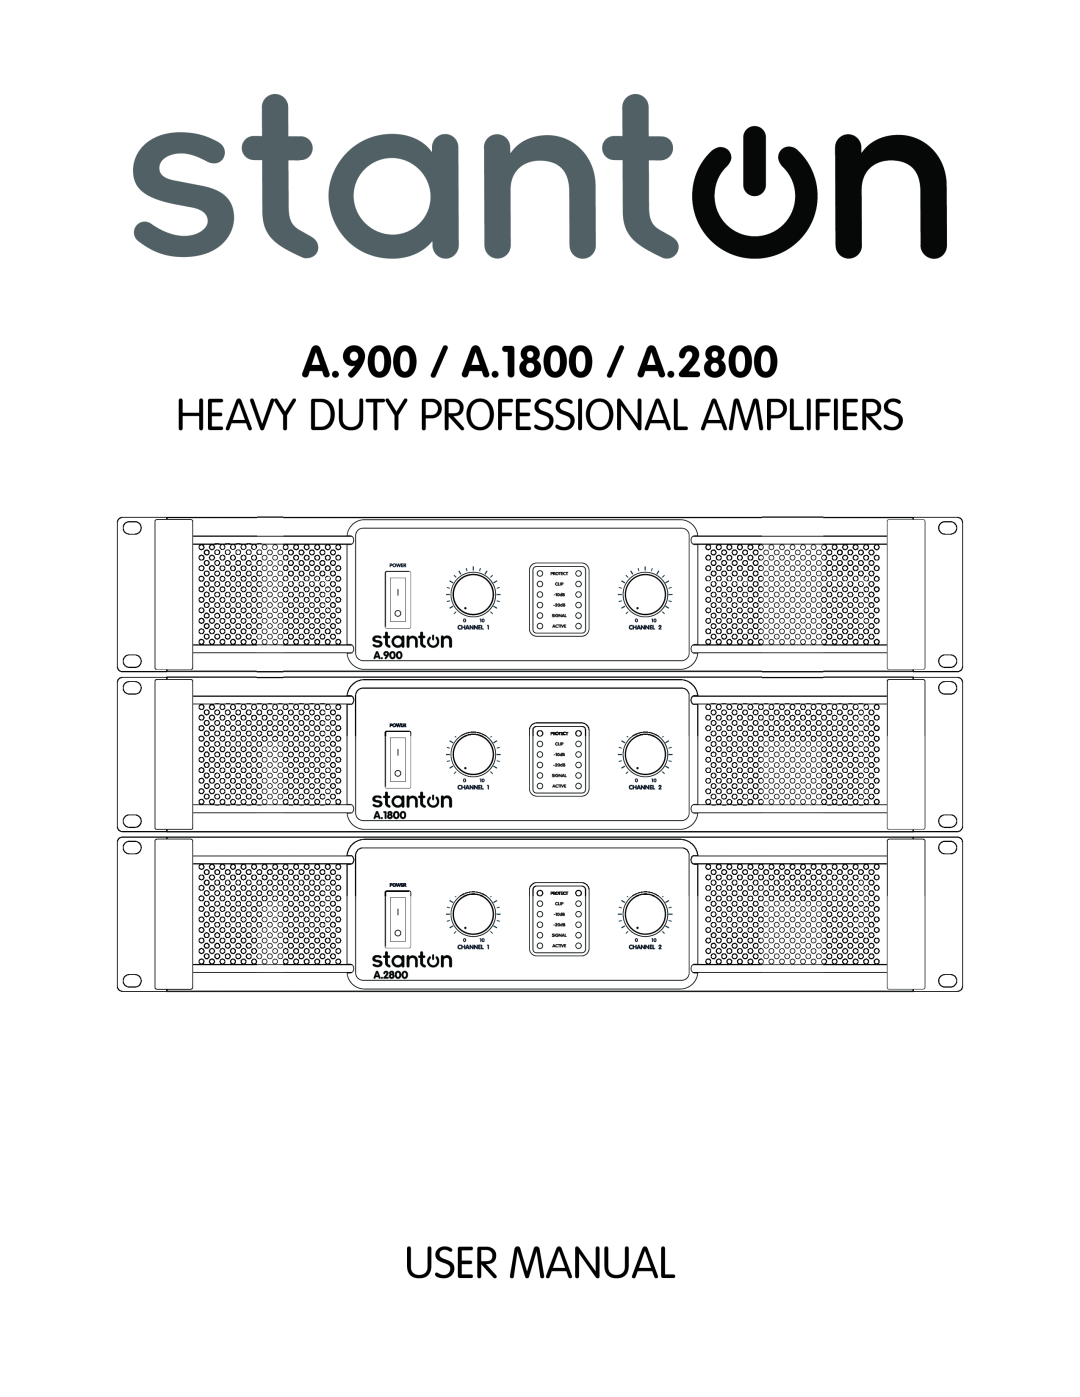 Stanton user manual A.900 / A.1800 / A.2800, Heavy Duty Professional Amplifiers 